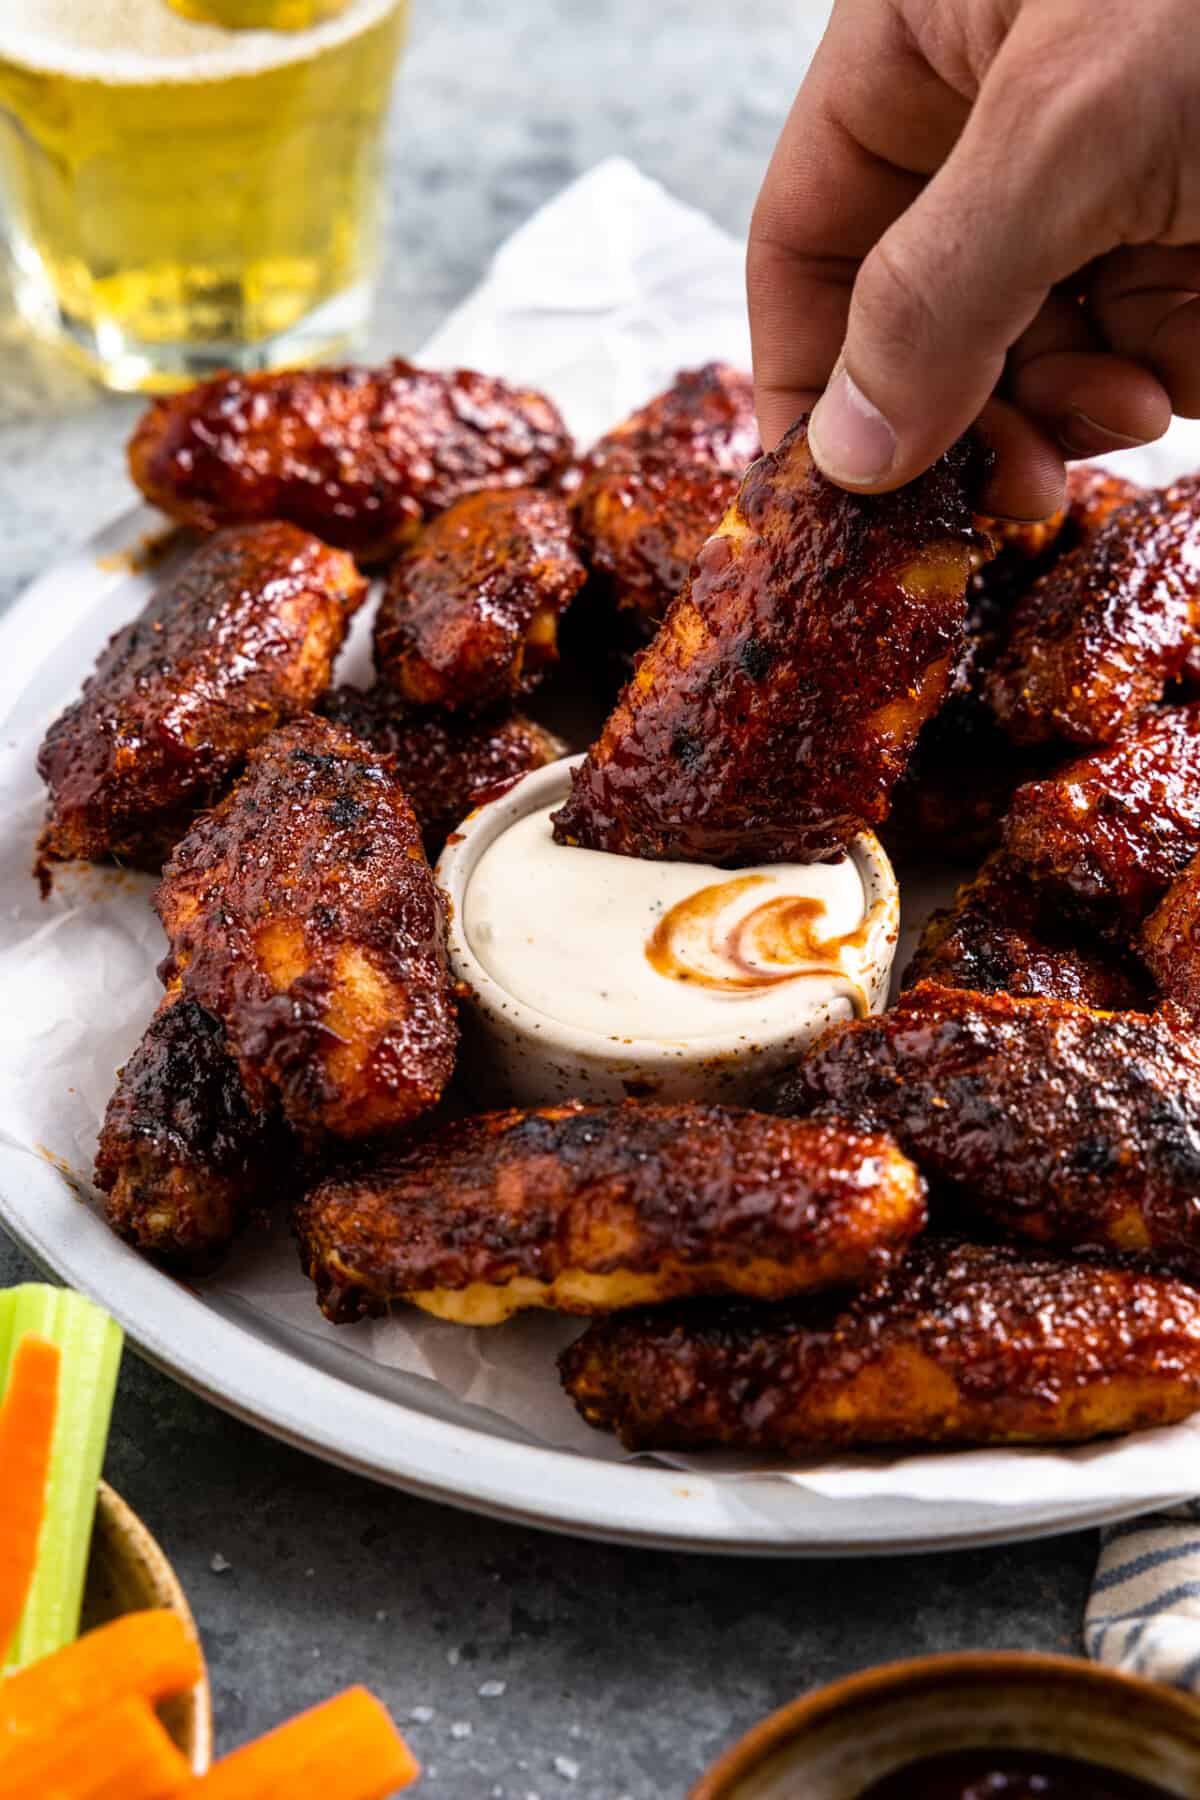 Hand holding a chicken wing with bbq sauce glaze being dipped into a bowl of ranch dressing.